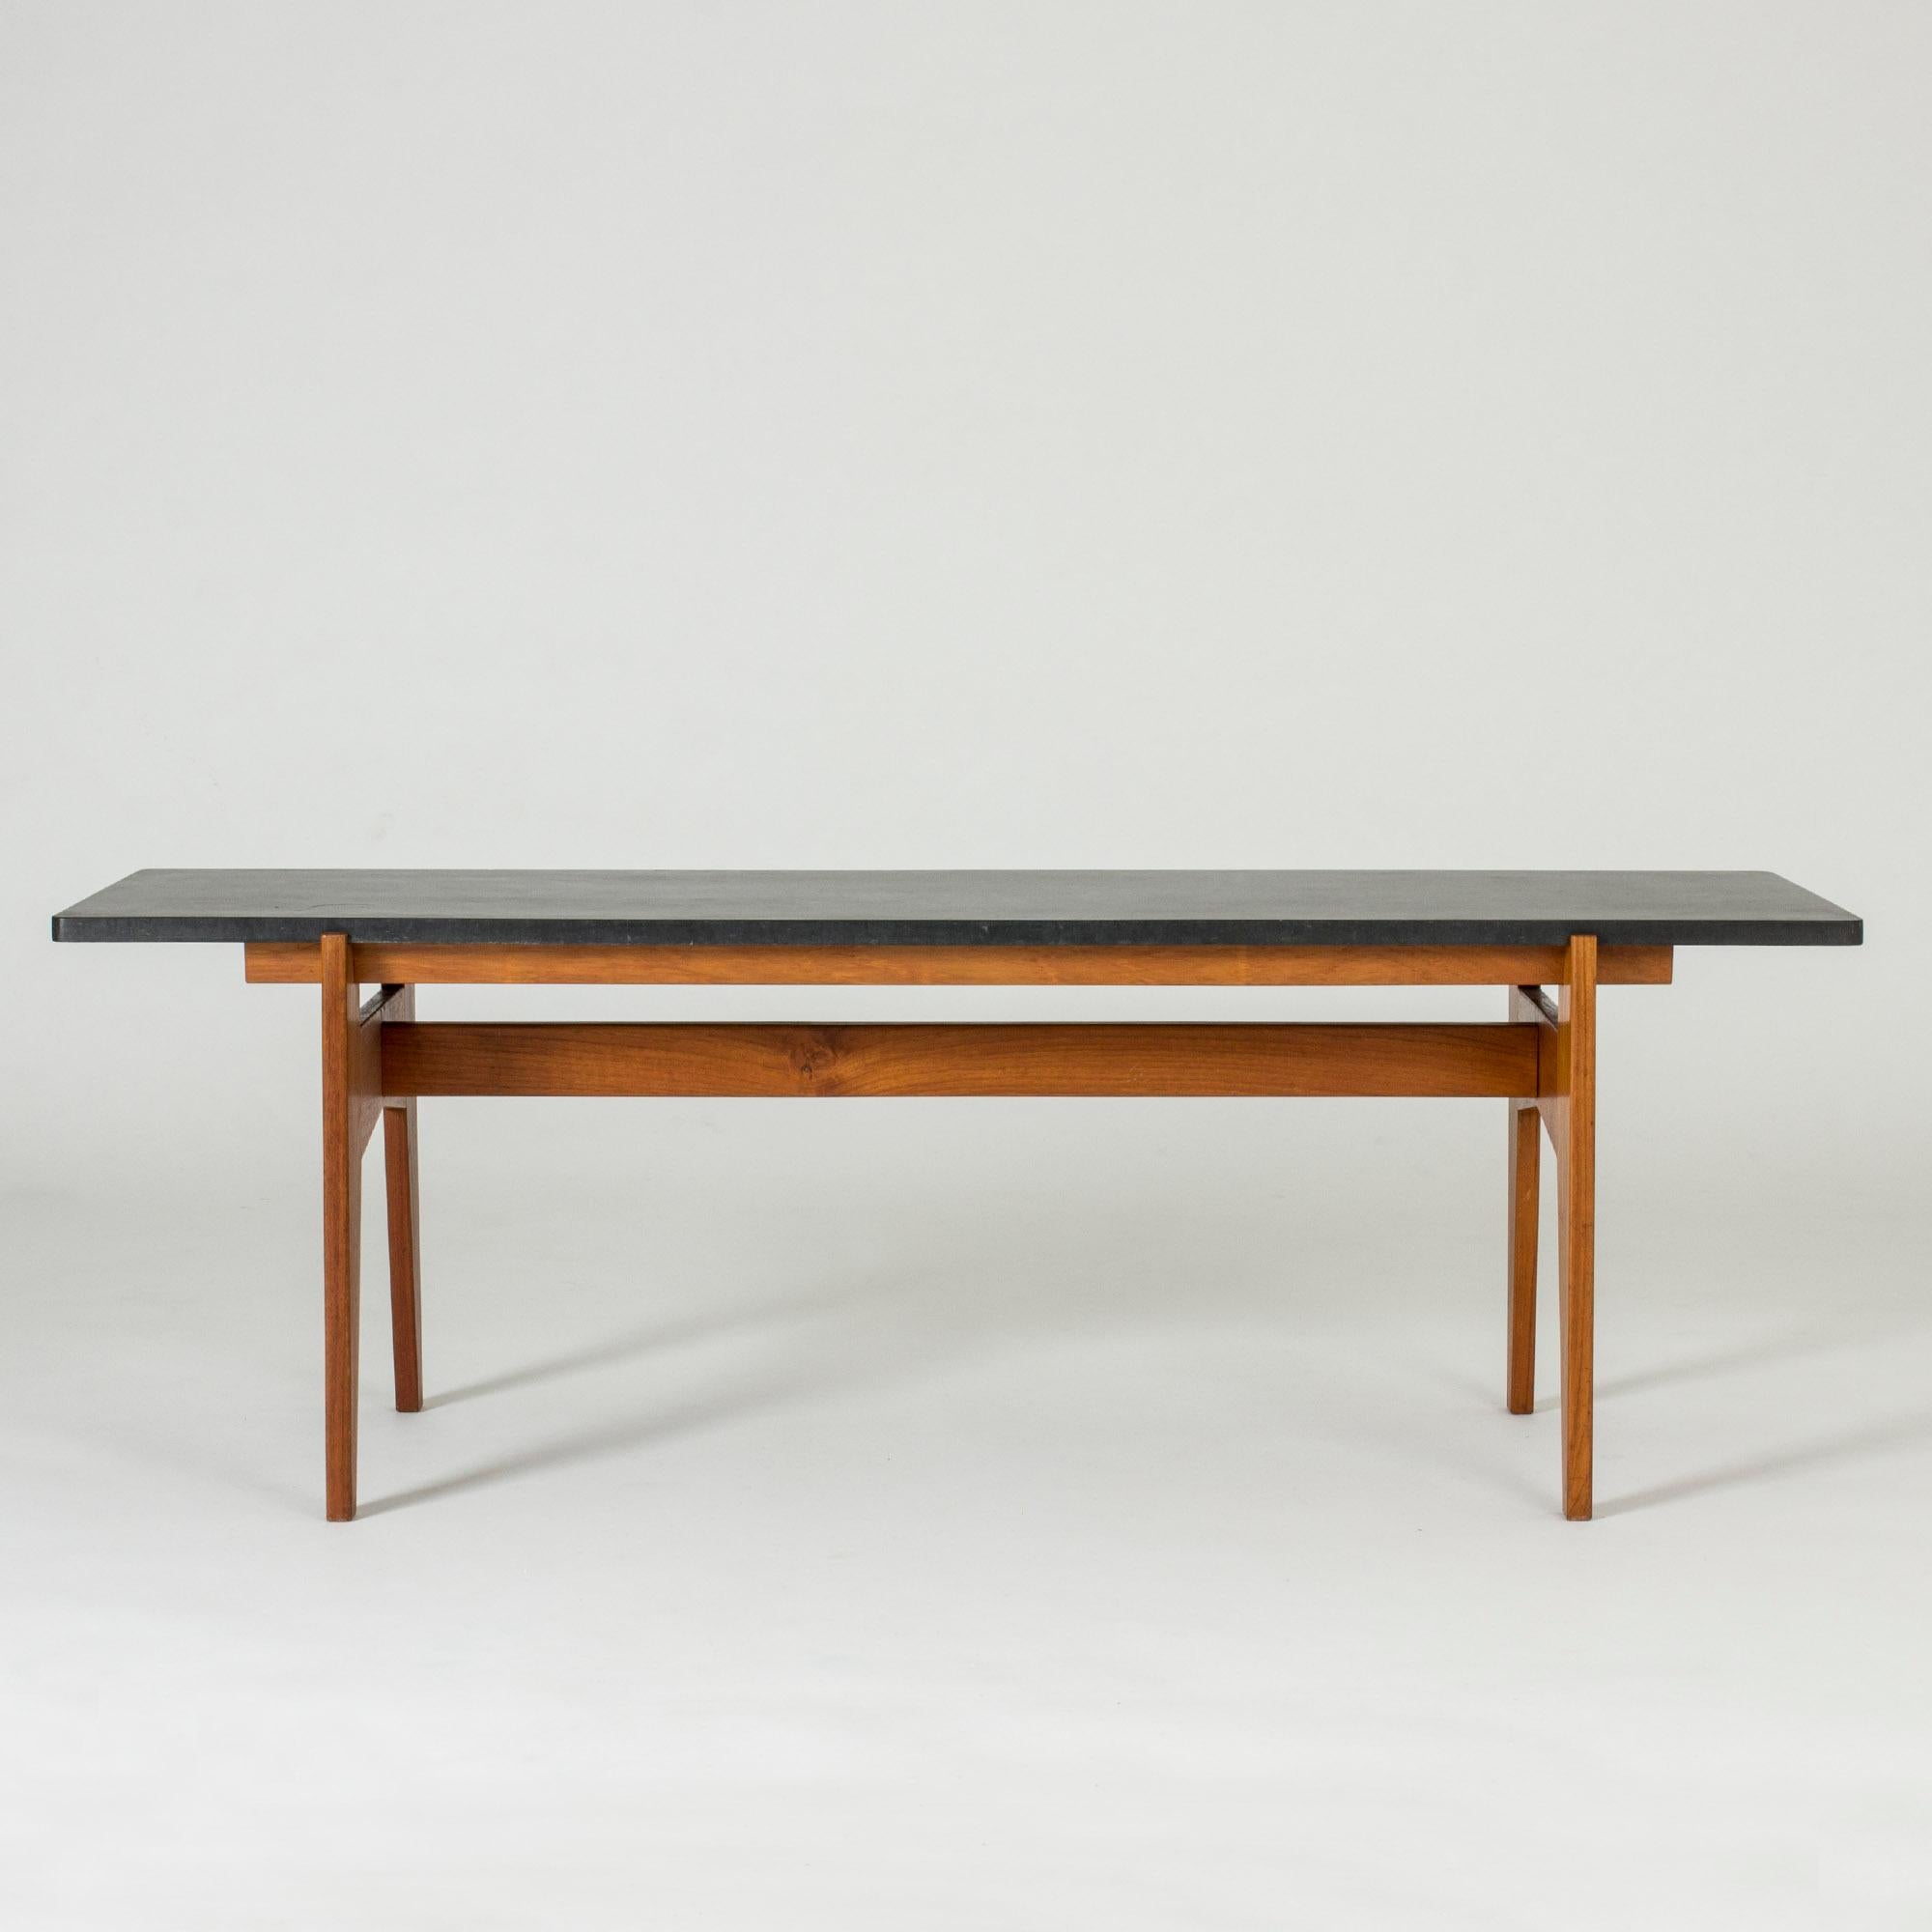 Teak and black stone coffee table by Hans-Agne Jakobsson, made in the early 1950s in his Åhus studio. Very cool, strict Silhouette, some structure in the table top.